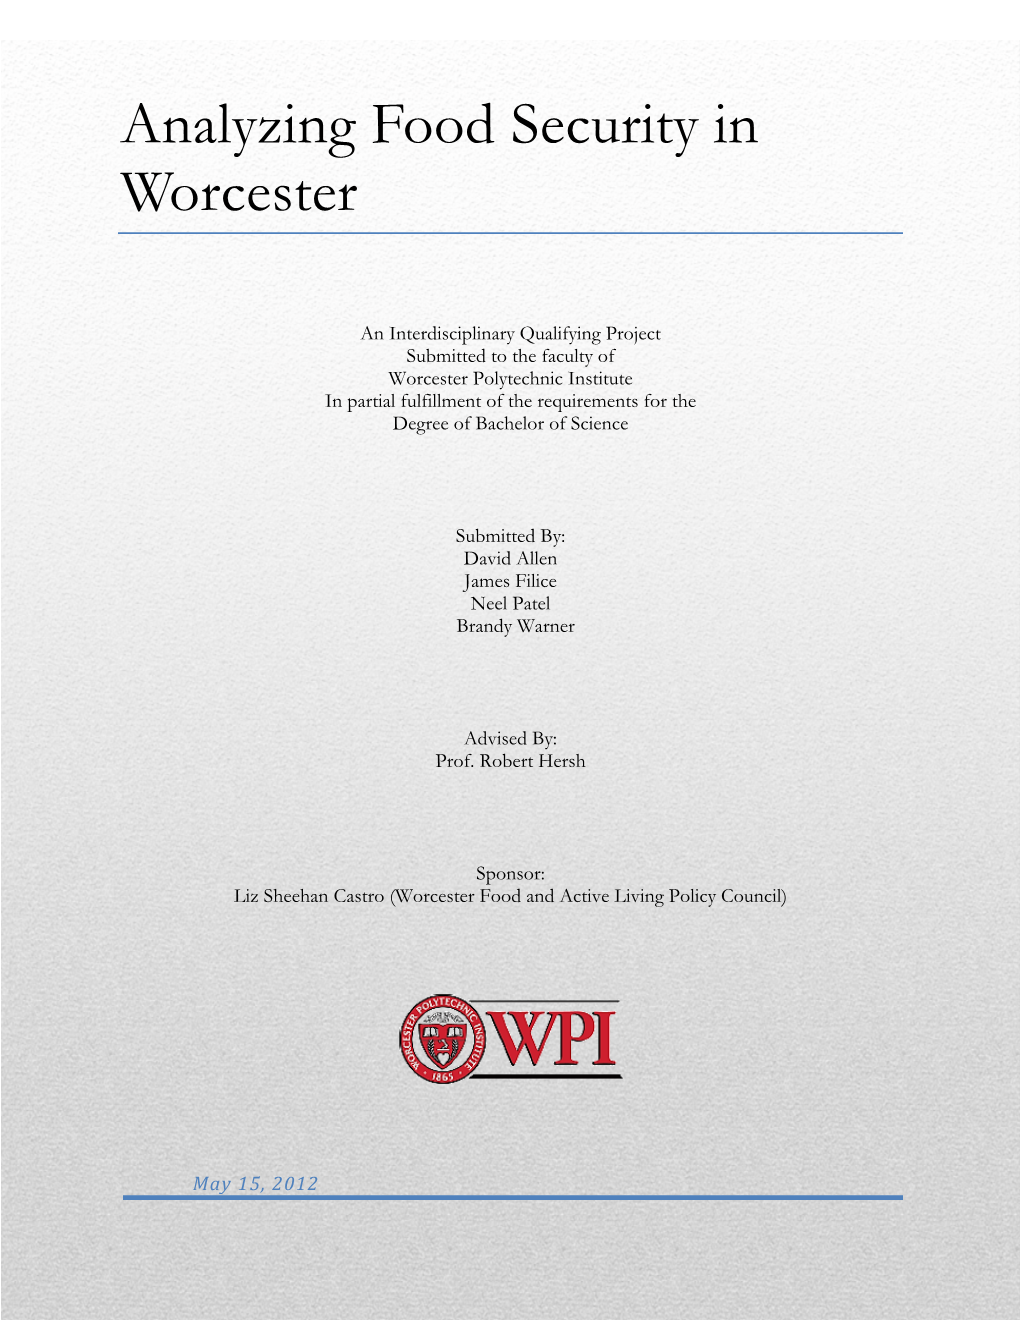 Analyzing Food Security in Worcester